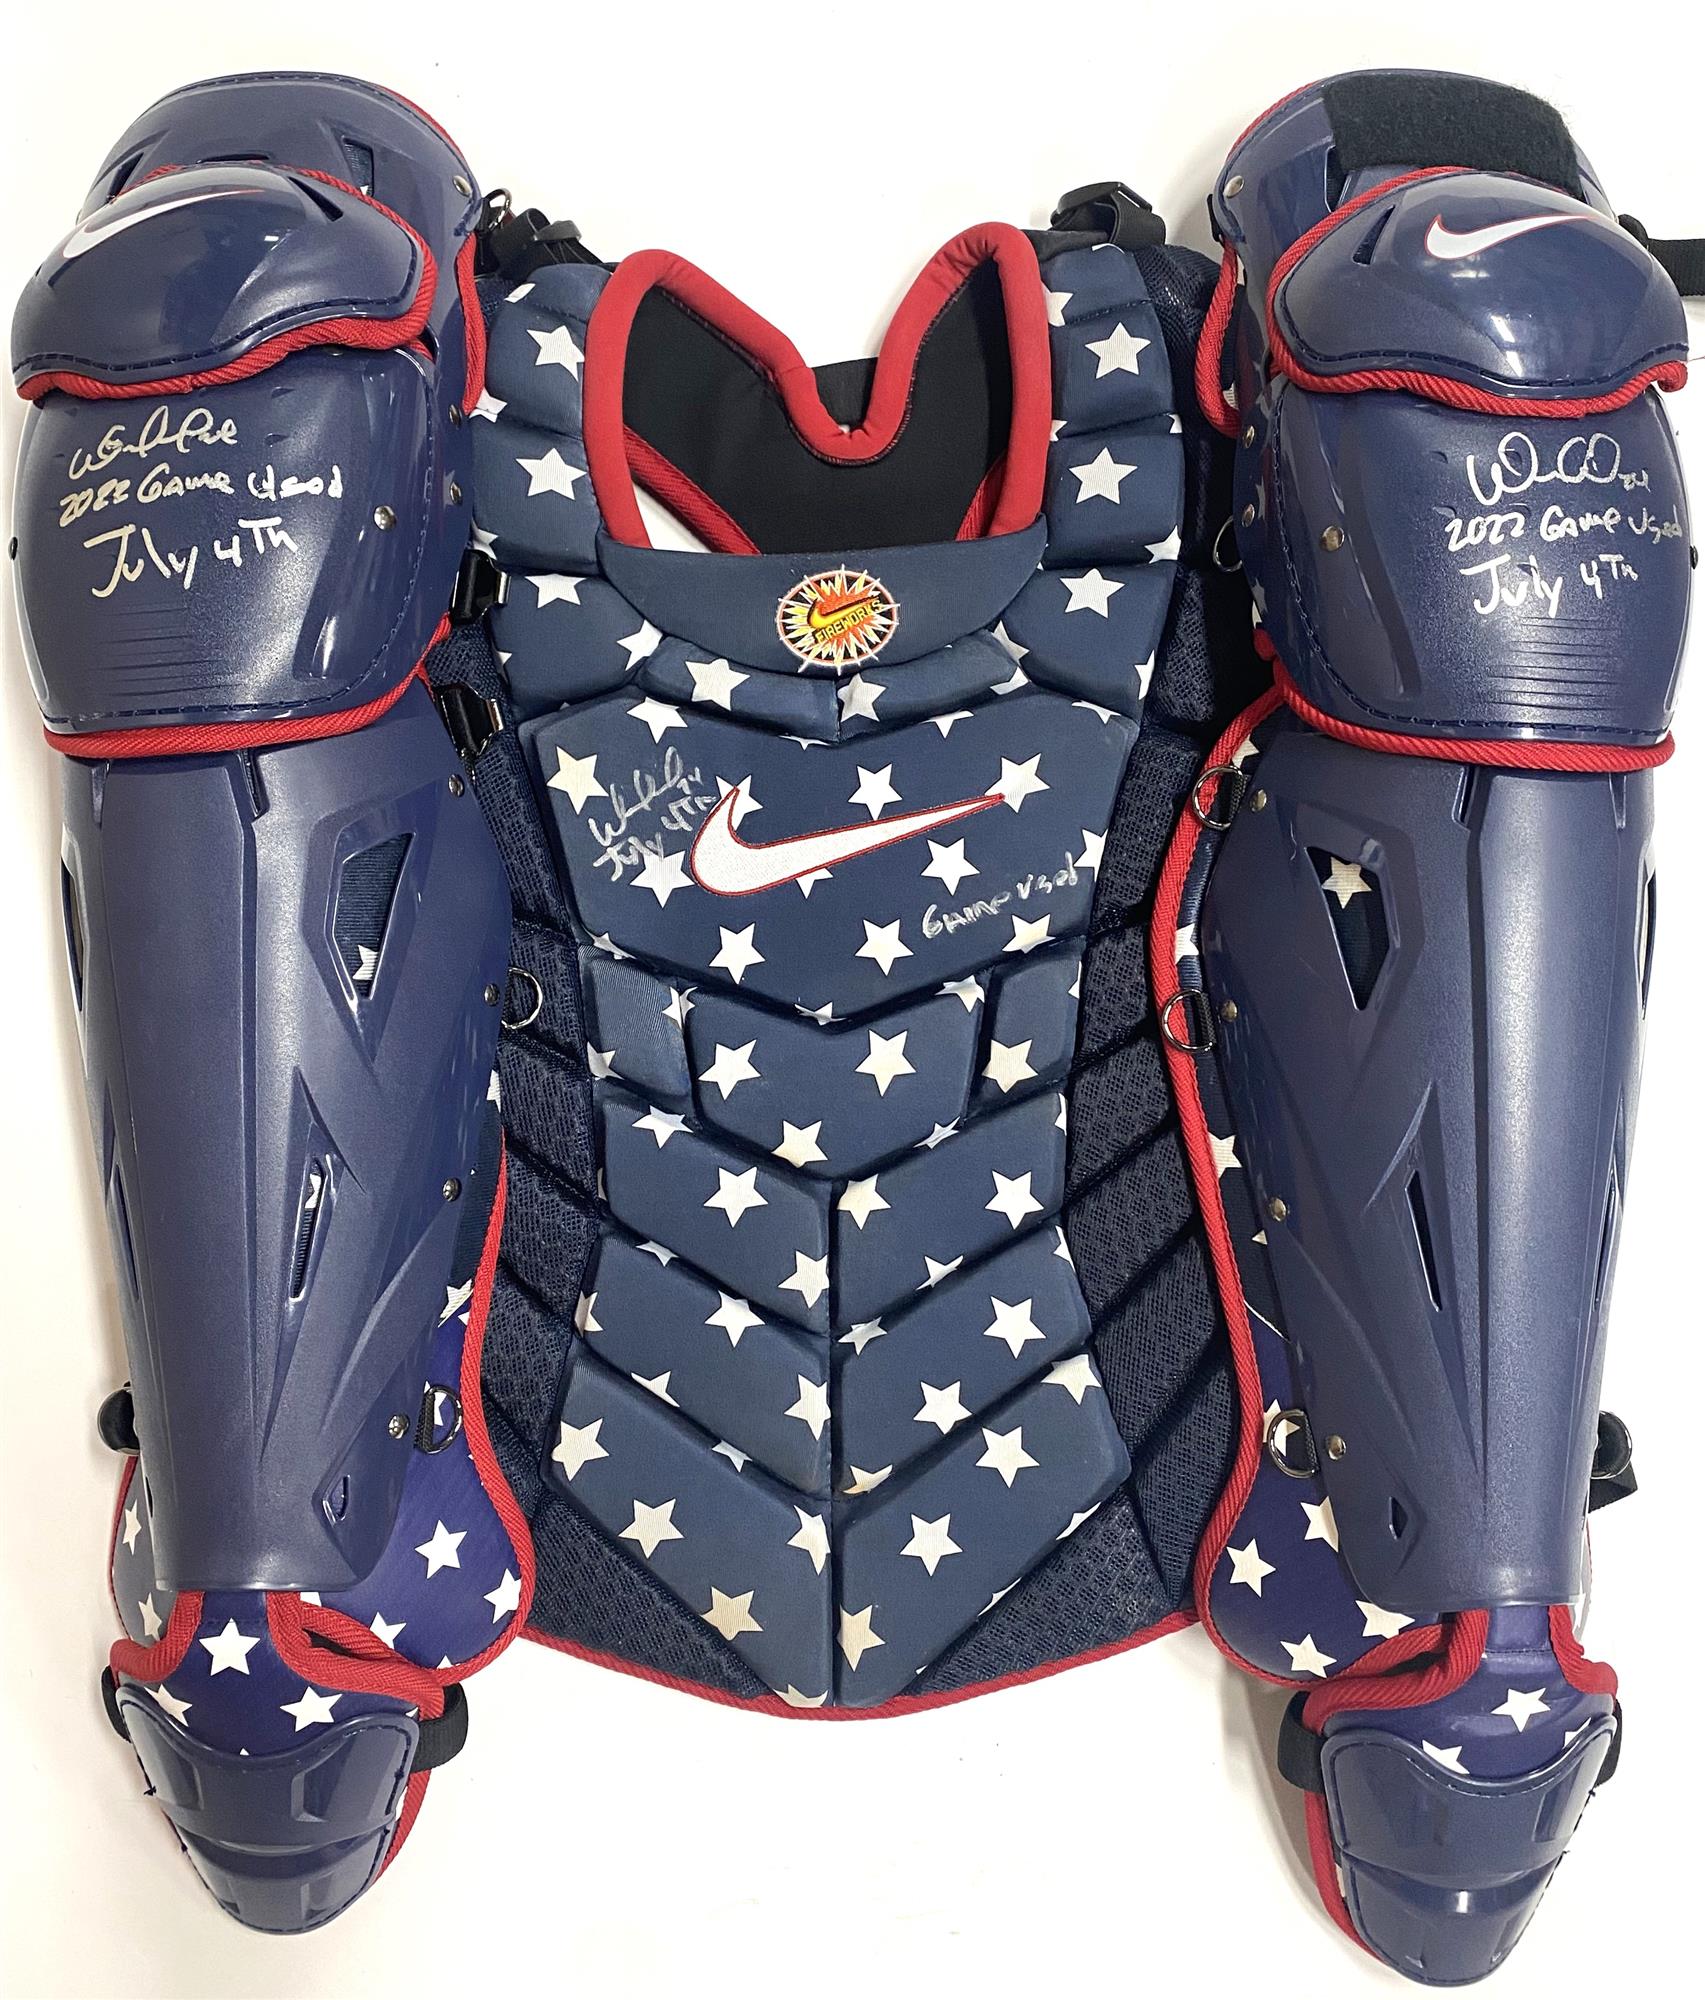 WILLIAM CONTRERAS SIGNED BRAVES 2022 4TH OF JULY GAME USED CATCHERS GEAR - JSA